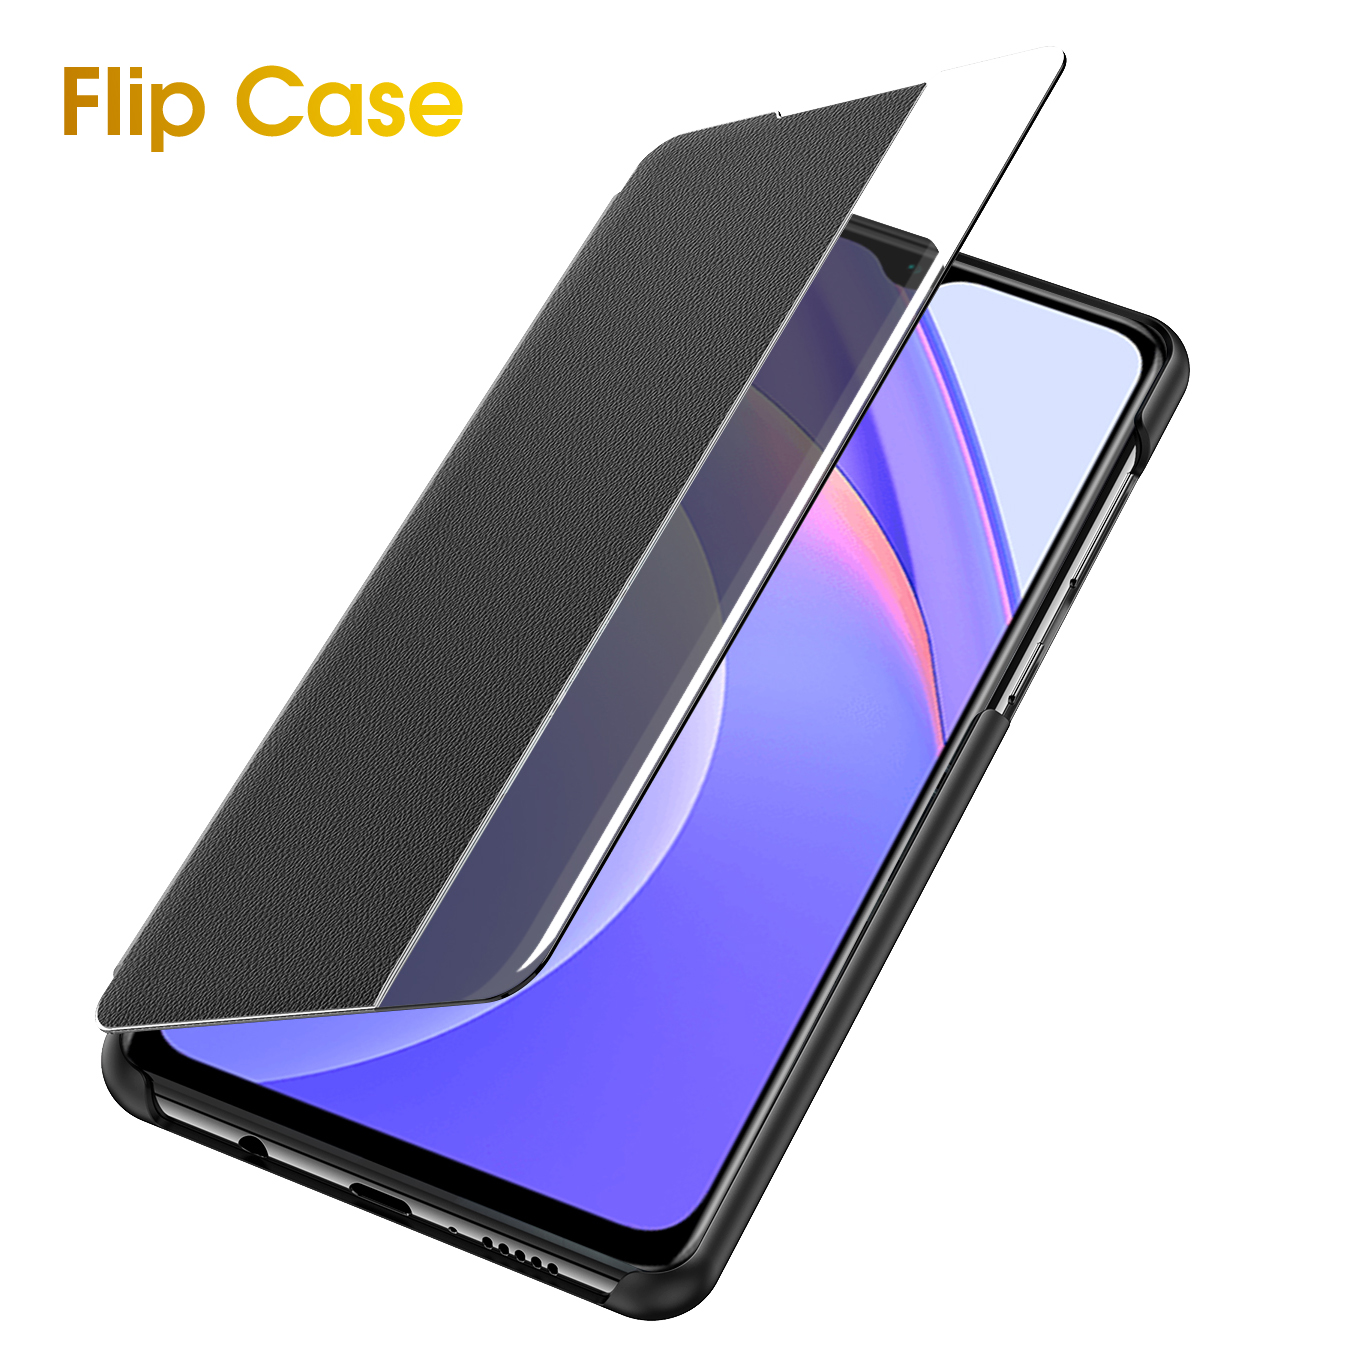 Bakeey-for-POCO-M3-Case-Magnetic-Foldable-Flip-Smart-Sleep-Window-View-Stand-PU-Leather-Protective-C-1827284-5